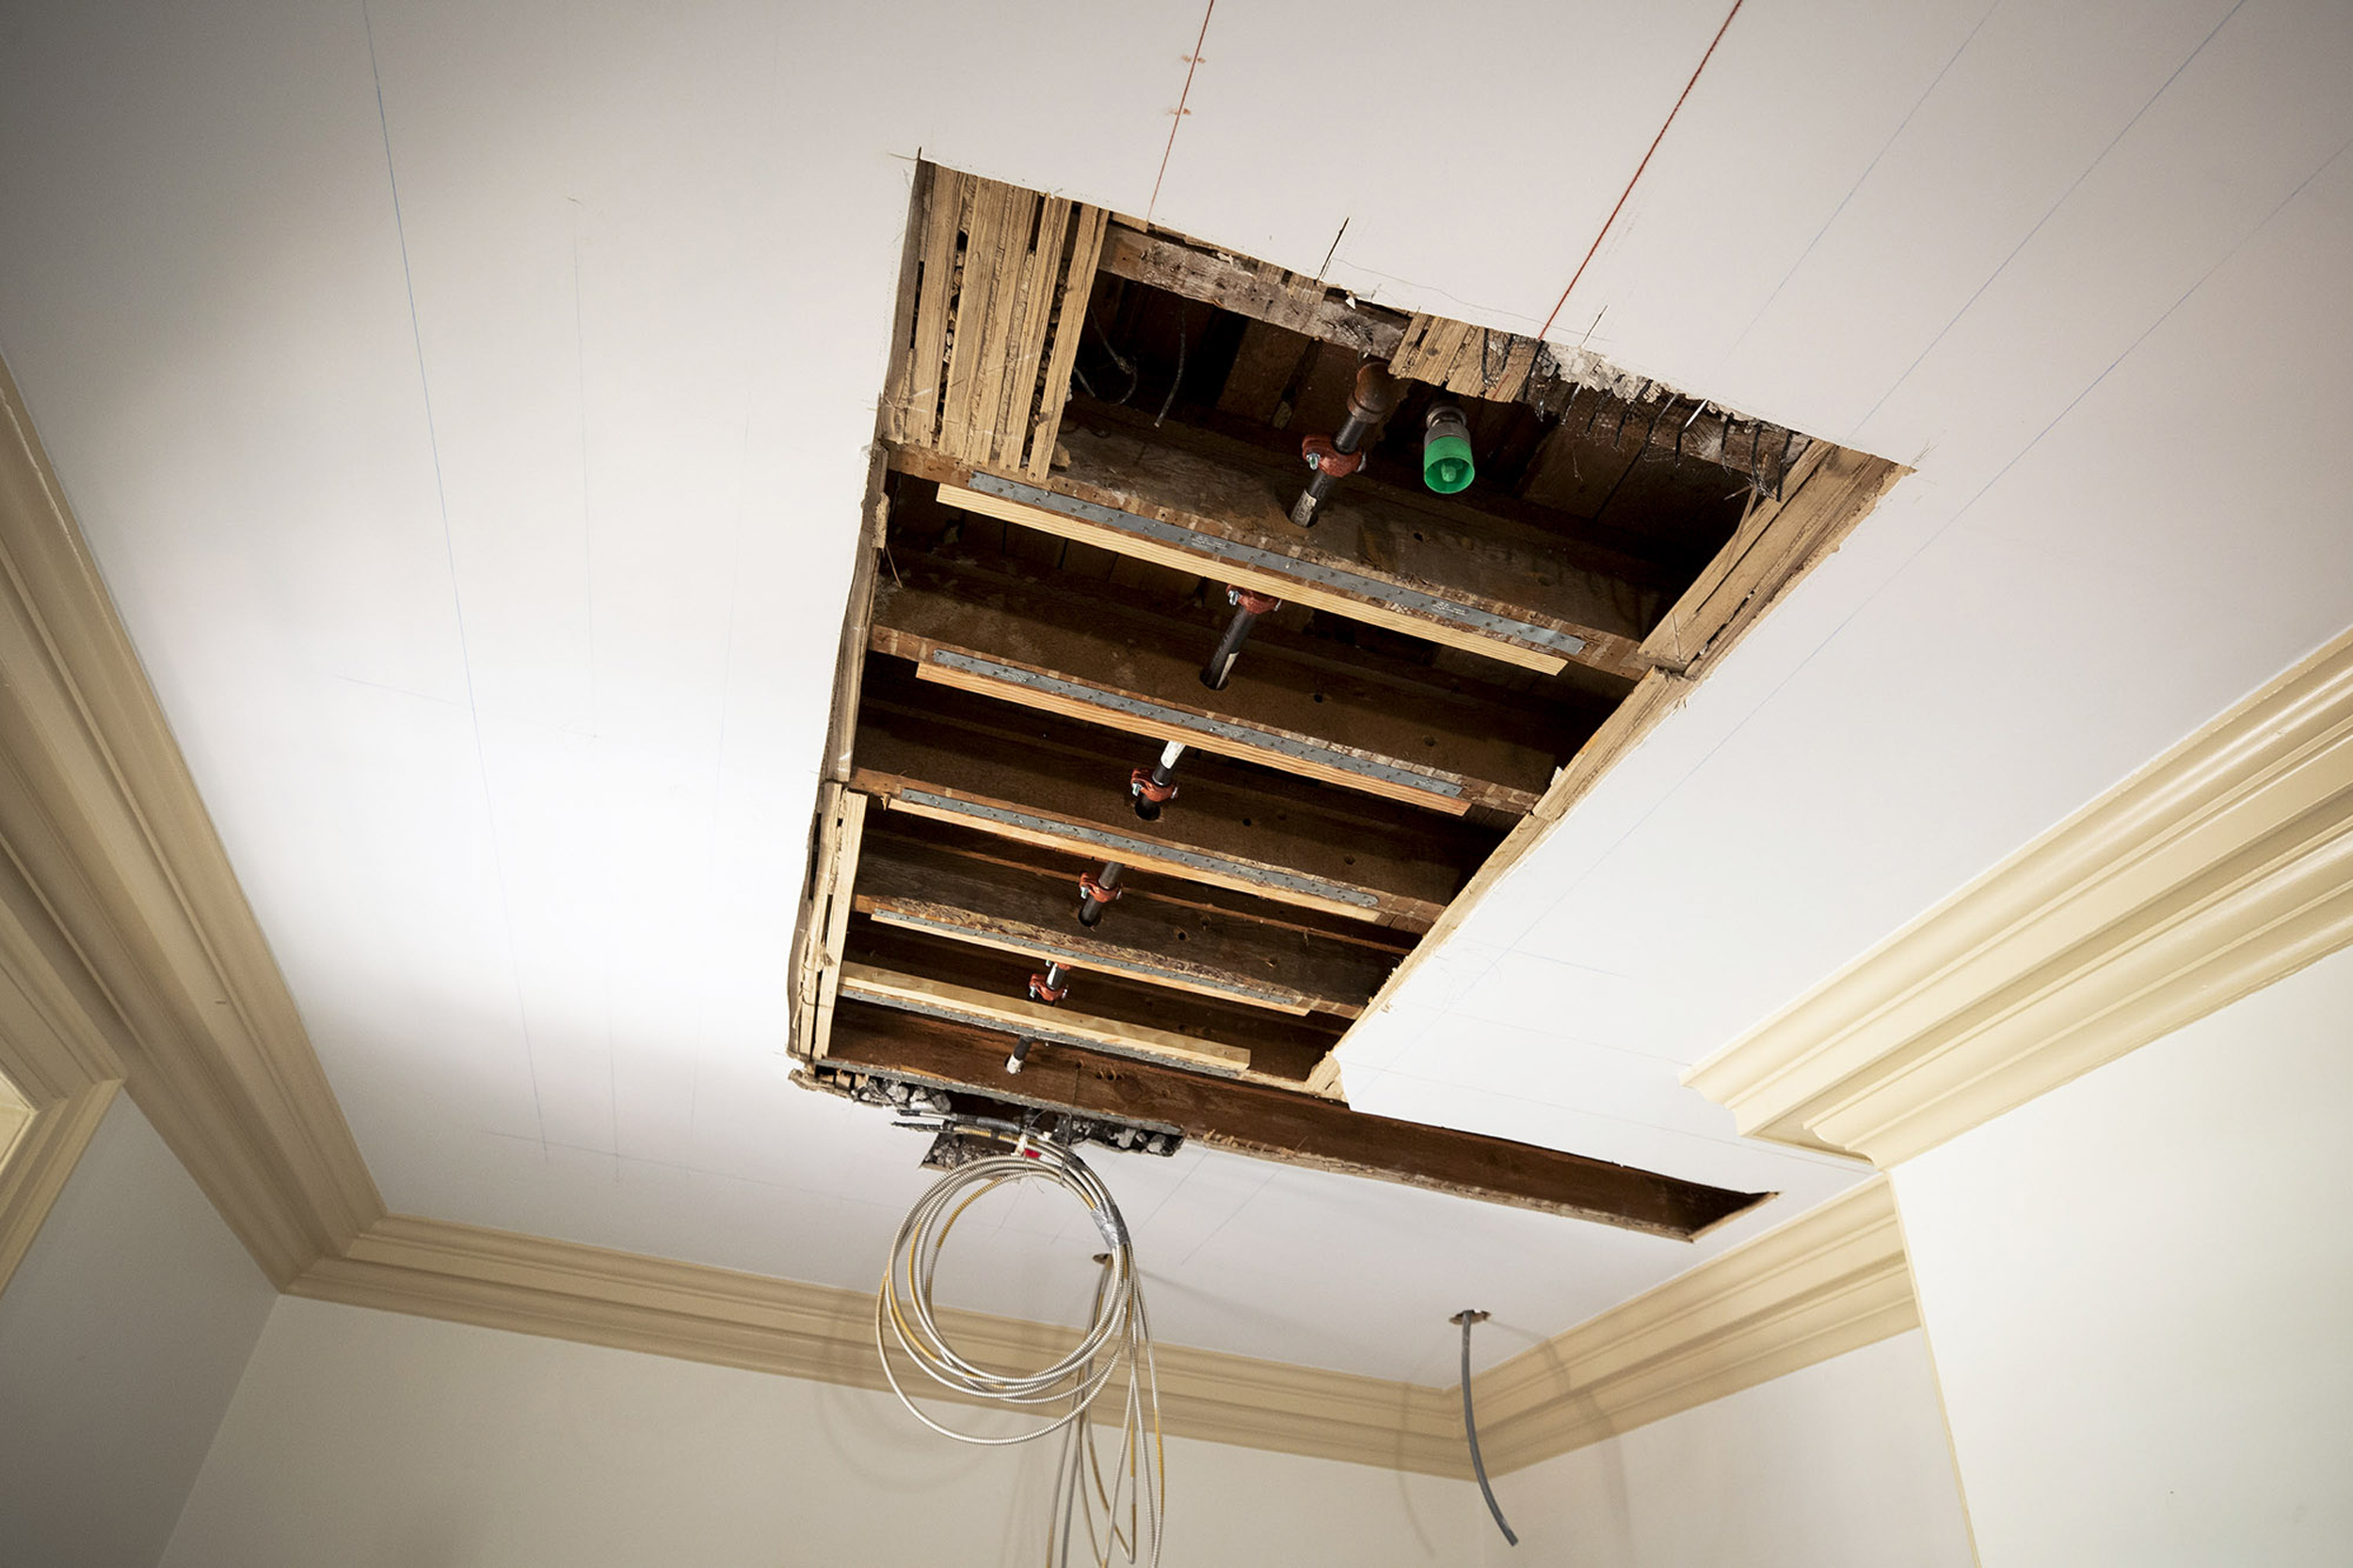 Whole in the ceiling to expose the water sprinkler system